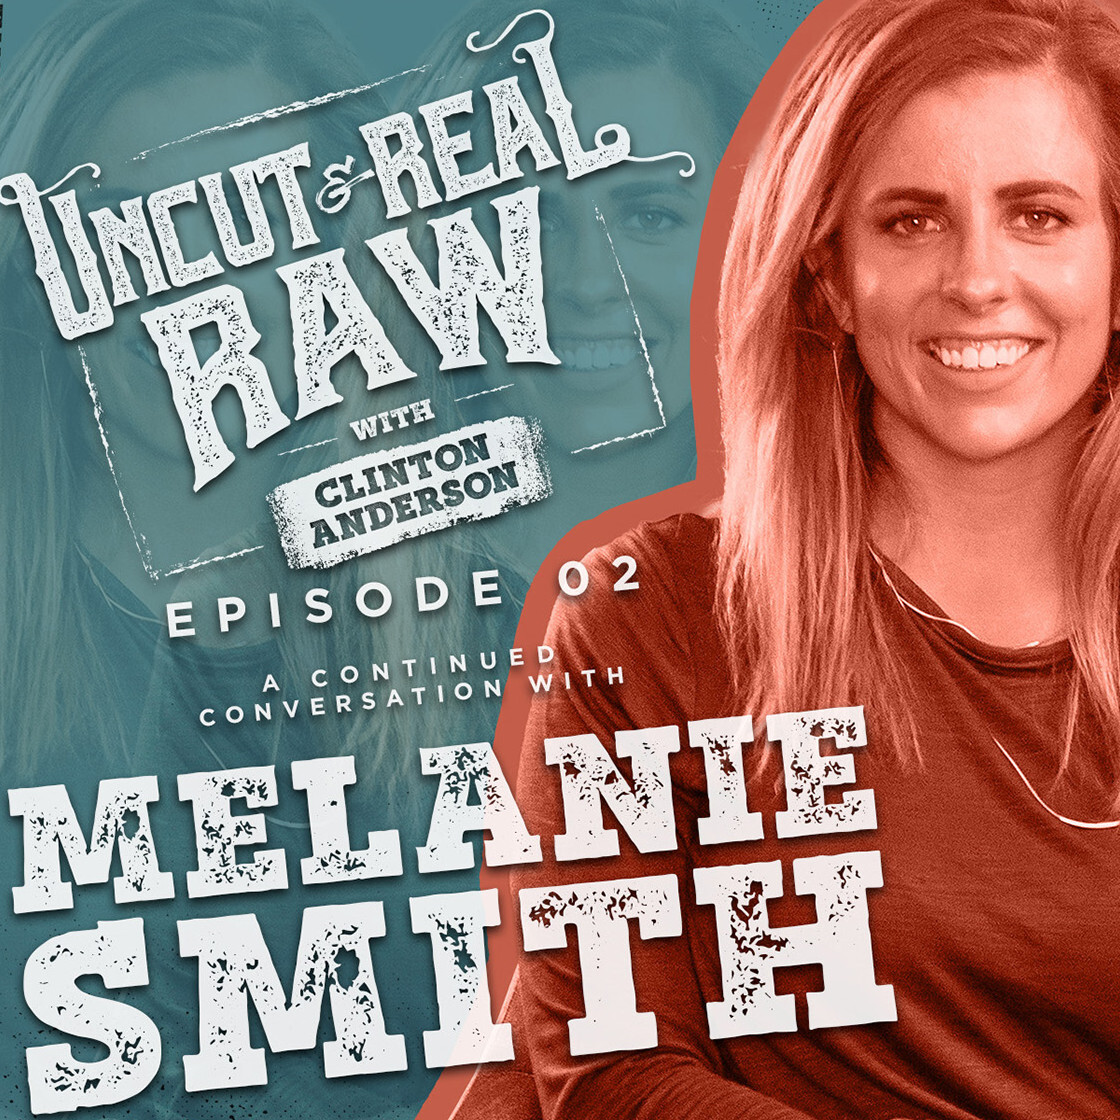 Ep 02: A Continued Conversation With Melanie Smith